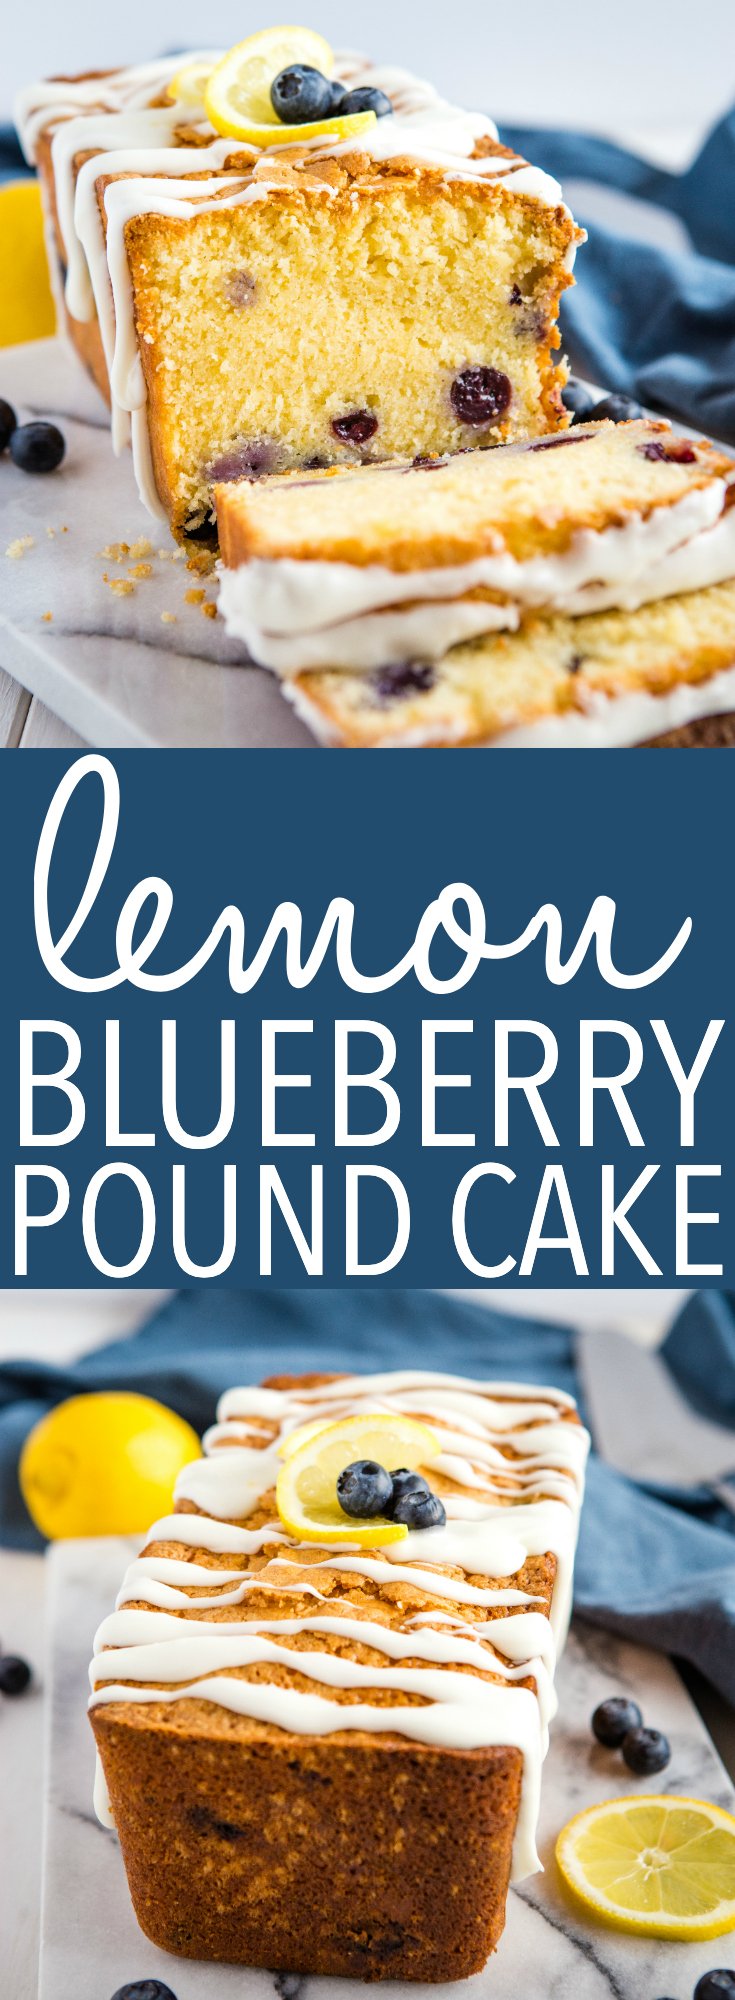 This Lemon Blueberry Pound Cake is the perfect simple spring dessert recipe that's made with fresh lemon and blueberries and a sweet creamy glaze! Recipe from thebusybaker.ca! #lemon #blueberry #poundcake #cake #dessert #fruit #spring #summer #glaze #creamy #baking #bake #easy #recipe #homemade via @busybakerblog